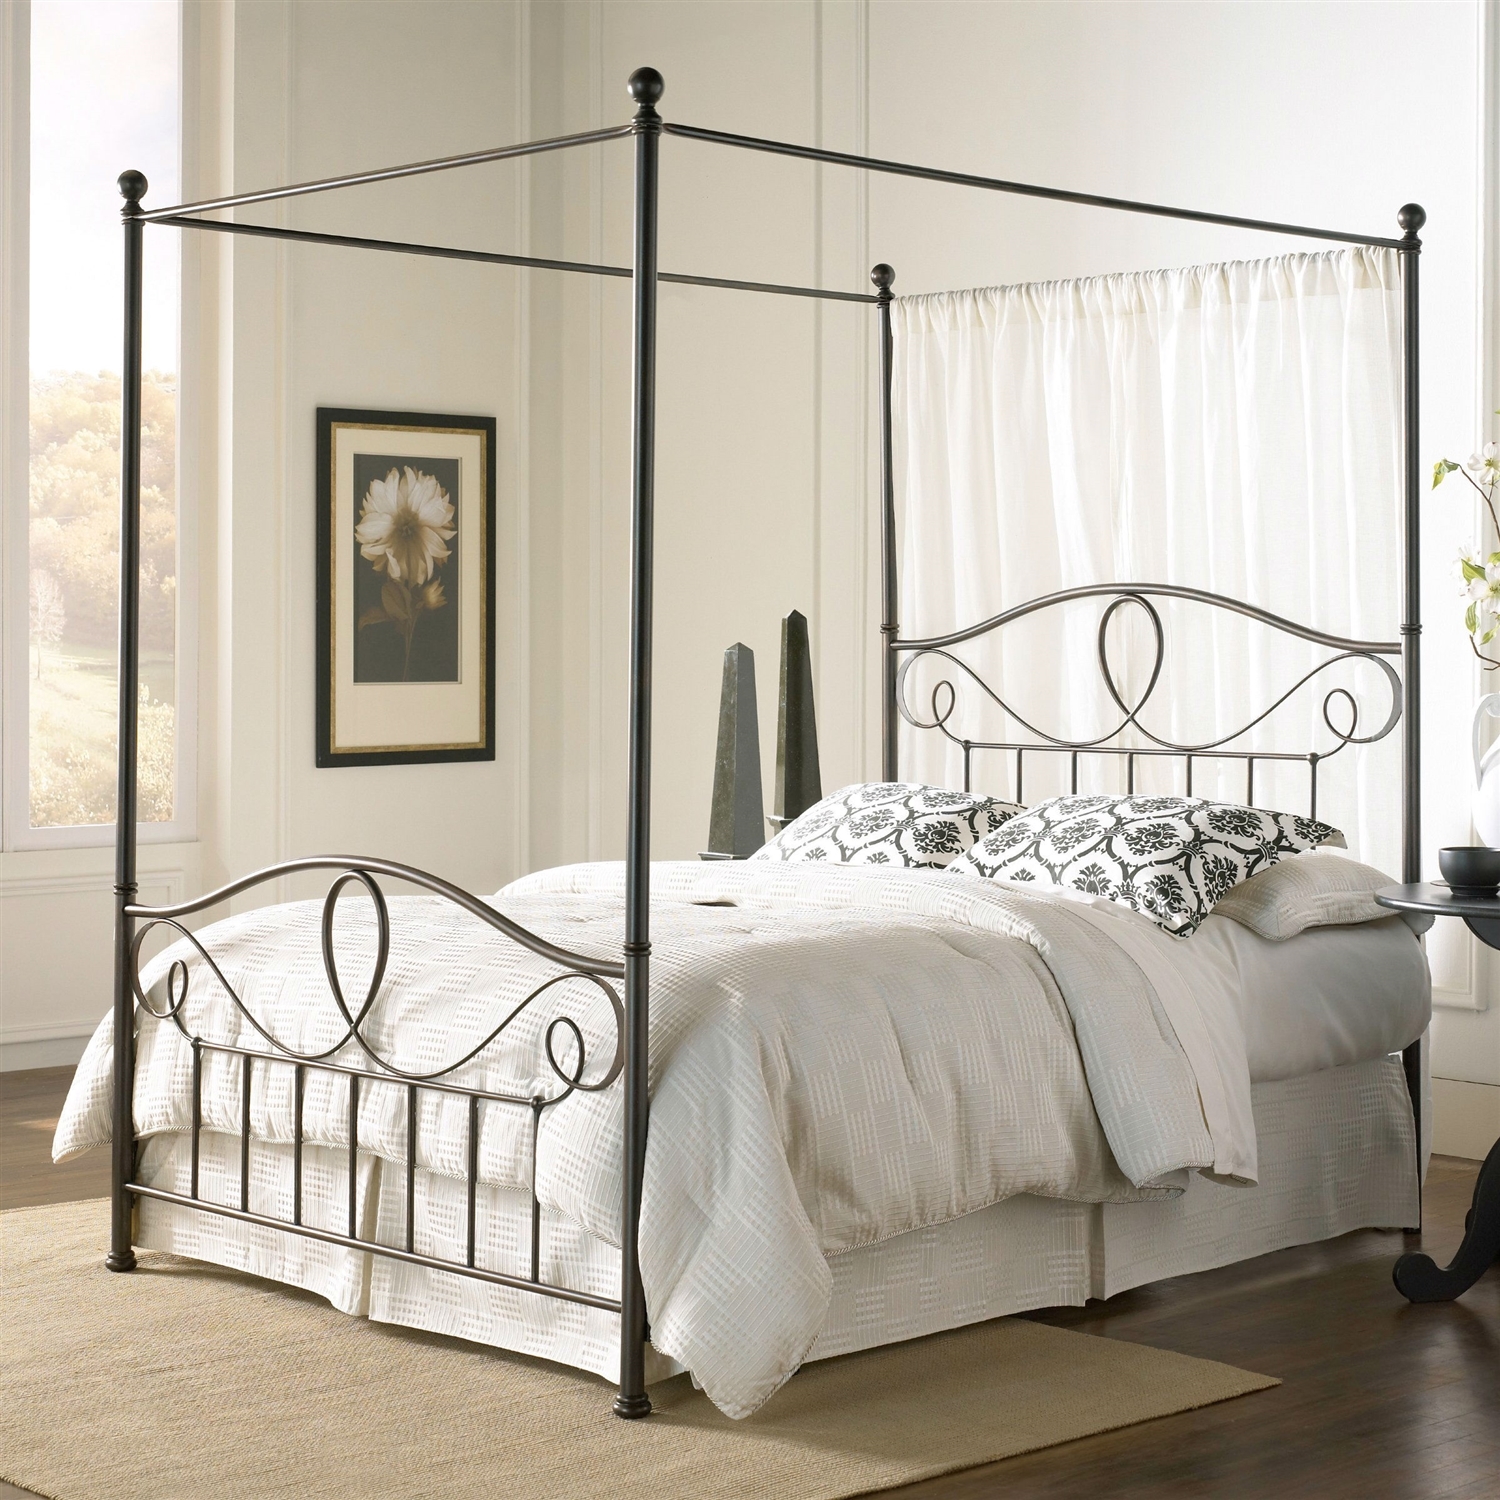 Full size Complete Metal Canopy Bed with Scroll-work and Ball Finials